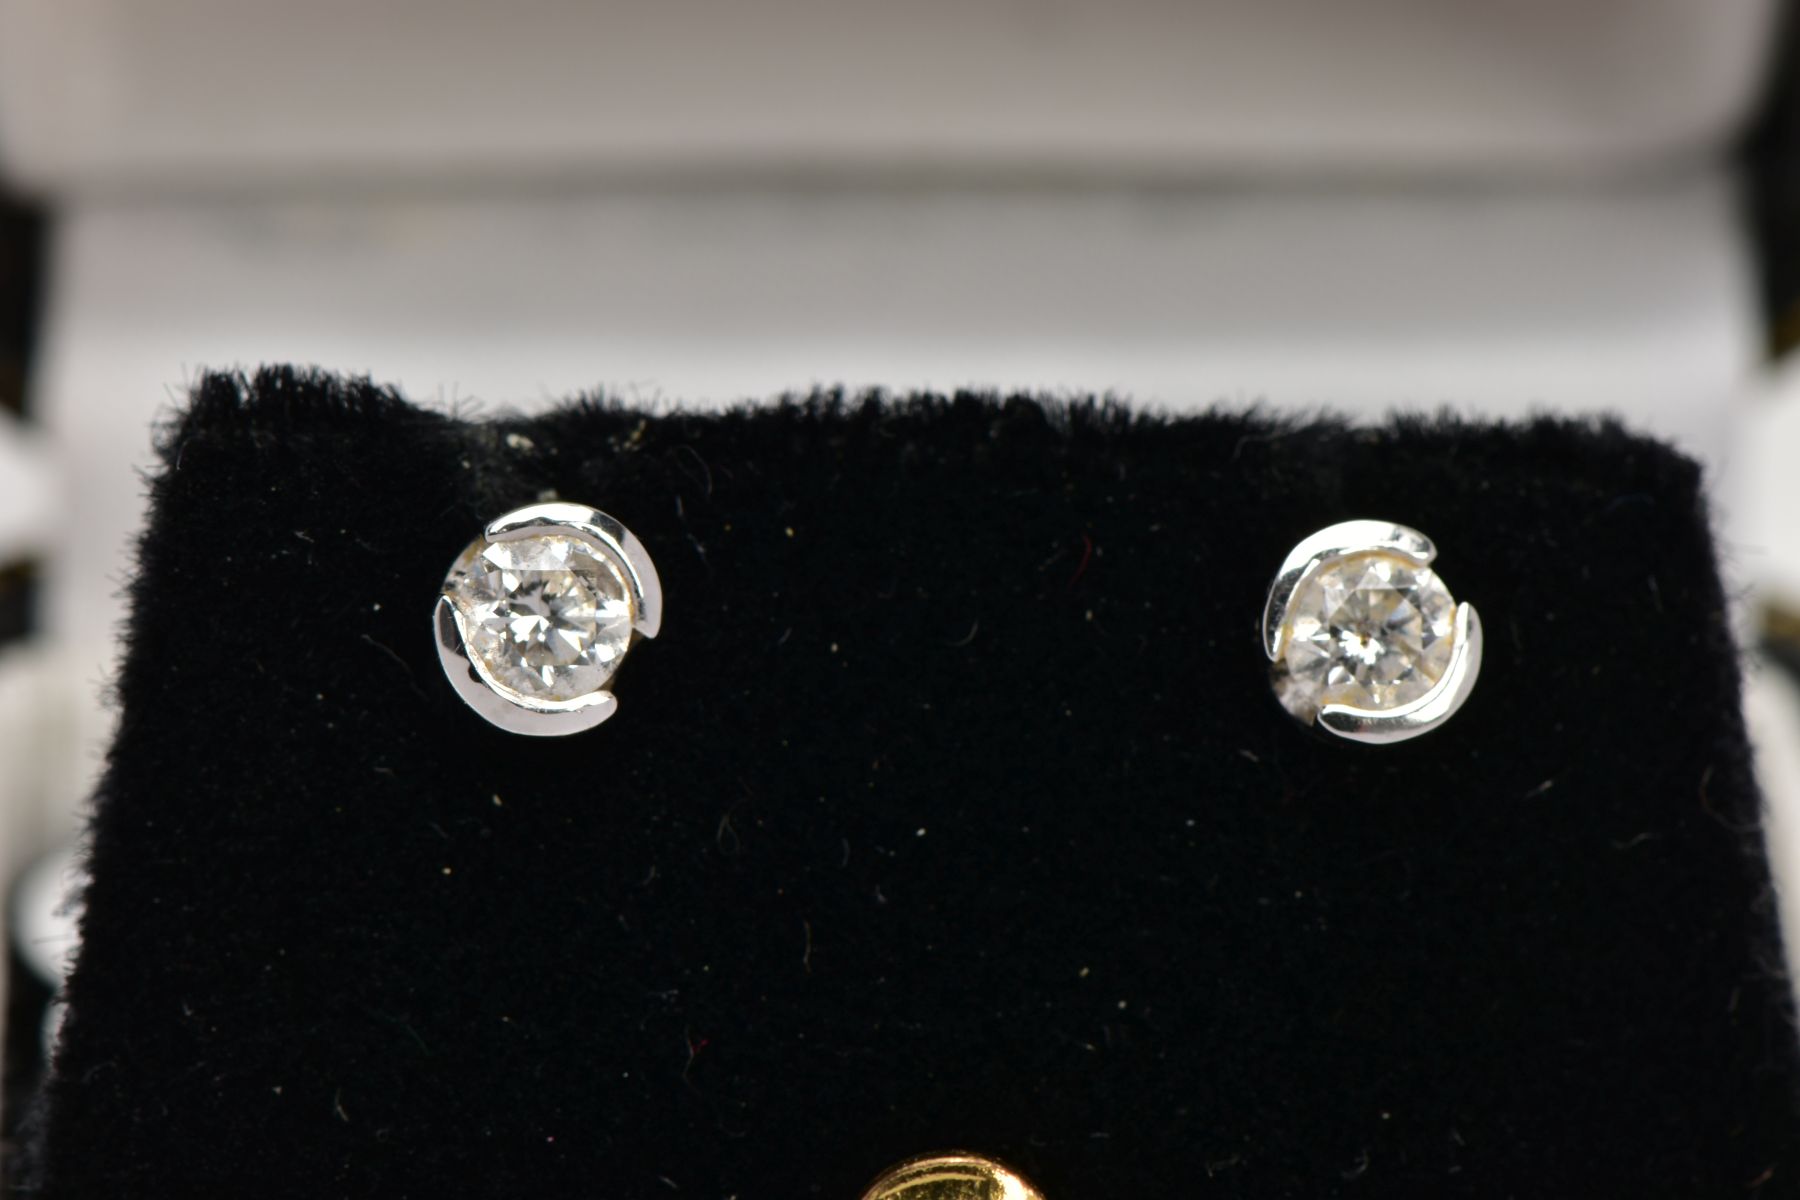 A PAIR OF 18CT GOLD DIAMOND STUD EARRINGS, each set with a single round brilliant cut diamond, total